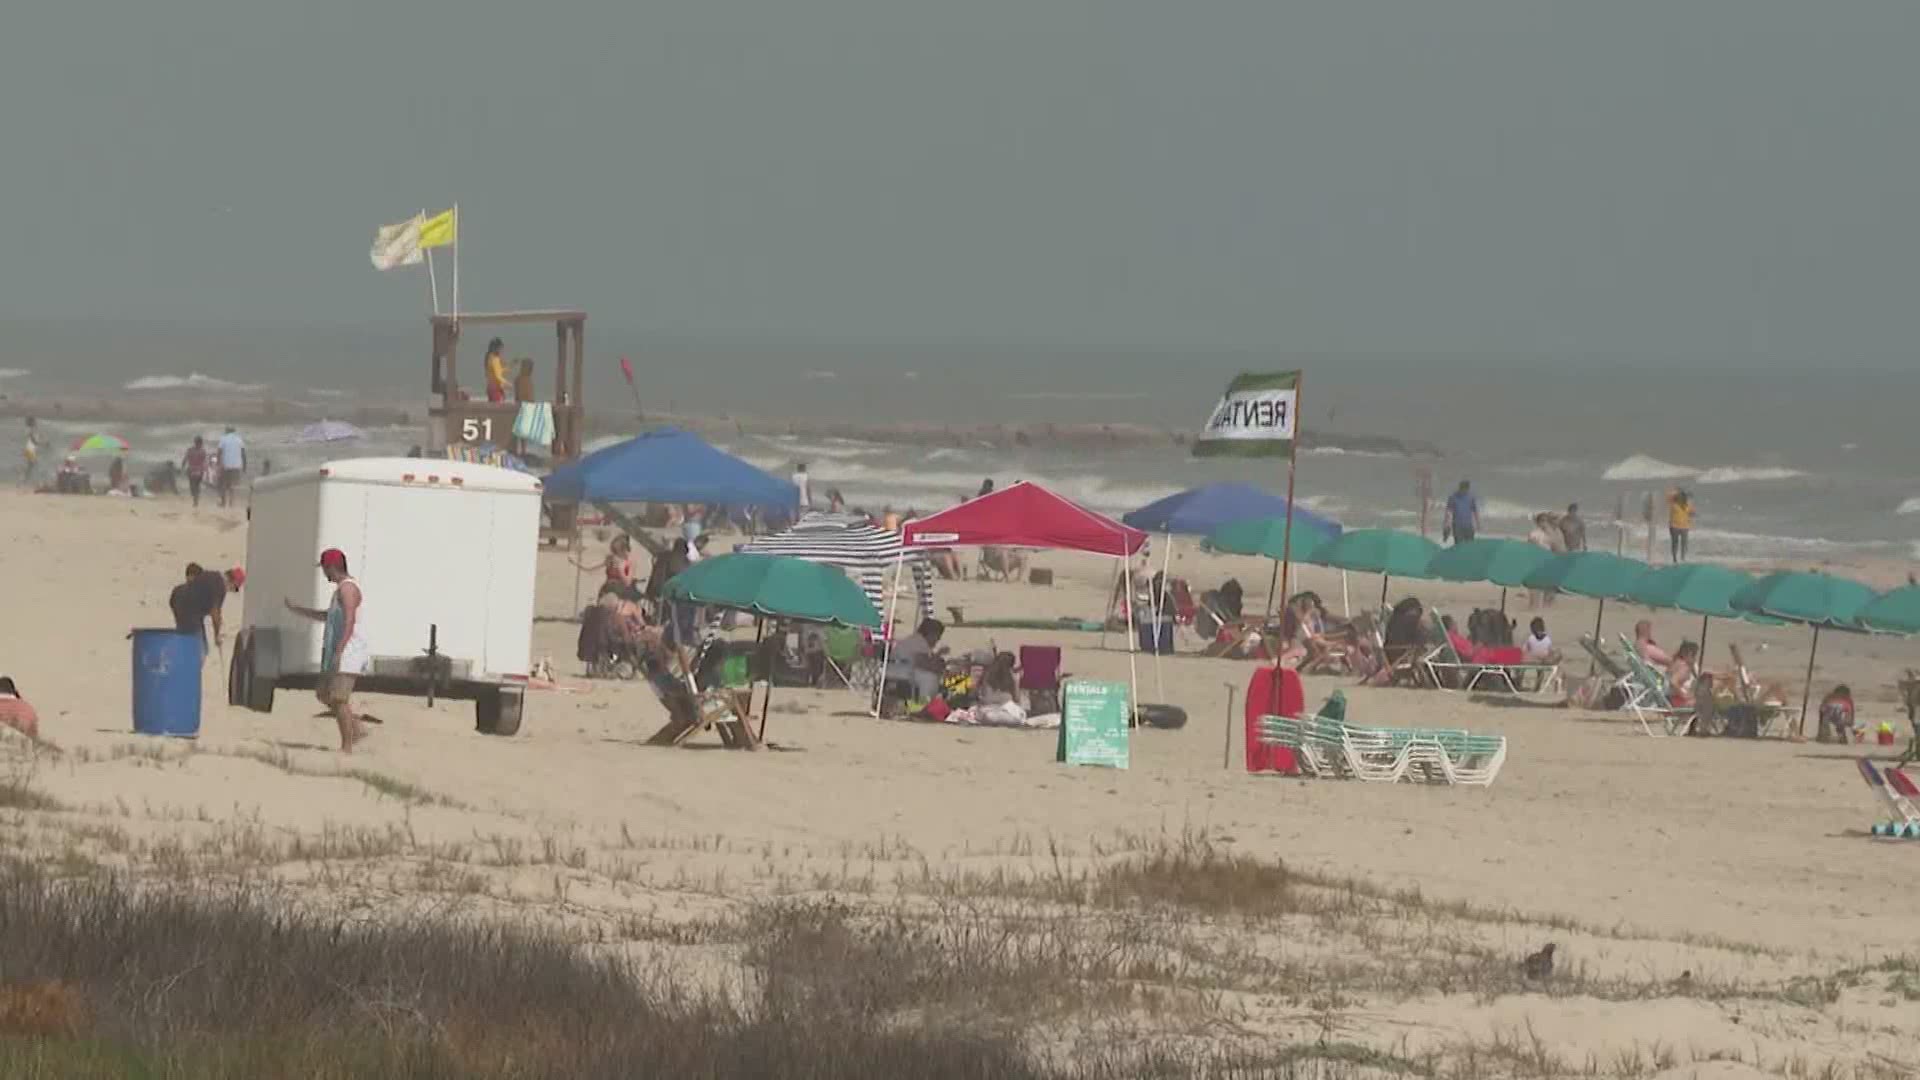 Galveston was the place to be on Saturday as the first Spring Break weekend of the year got underway.